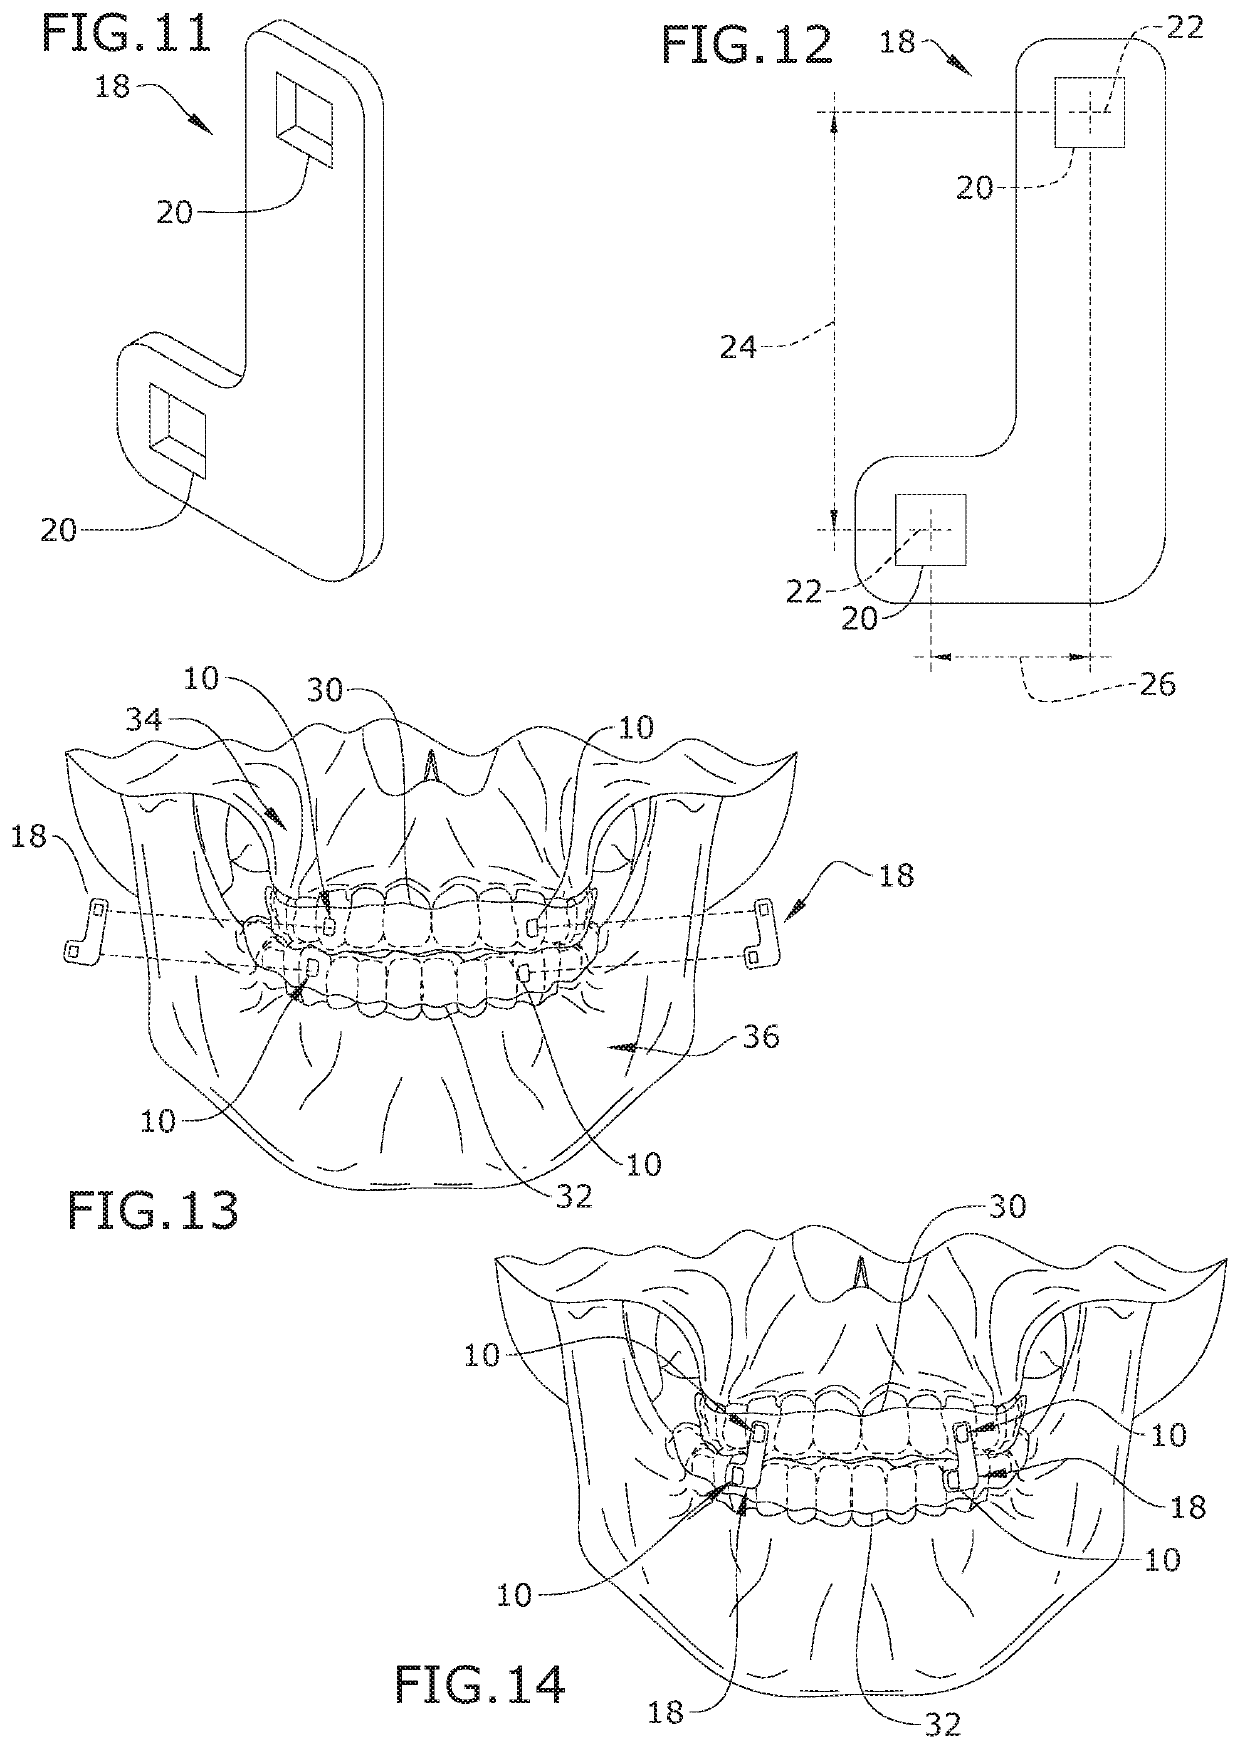 Apparatus and methods to convert dental, oral, orthodontic appliances, retainers, and dentures into a multifunctional oral appliance